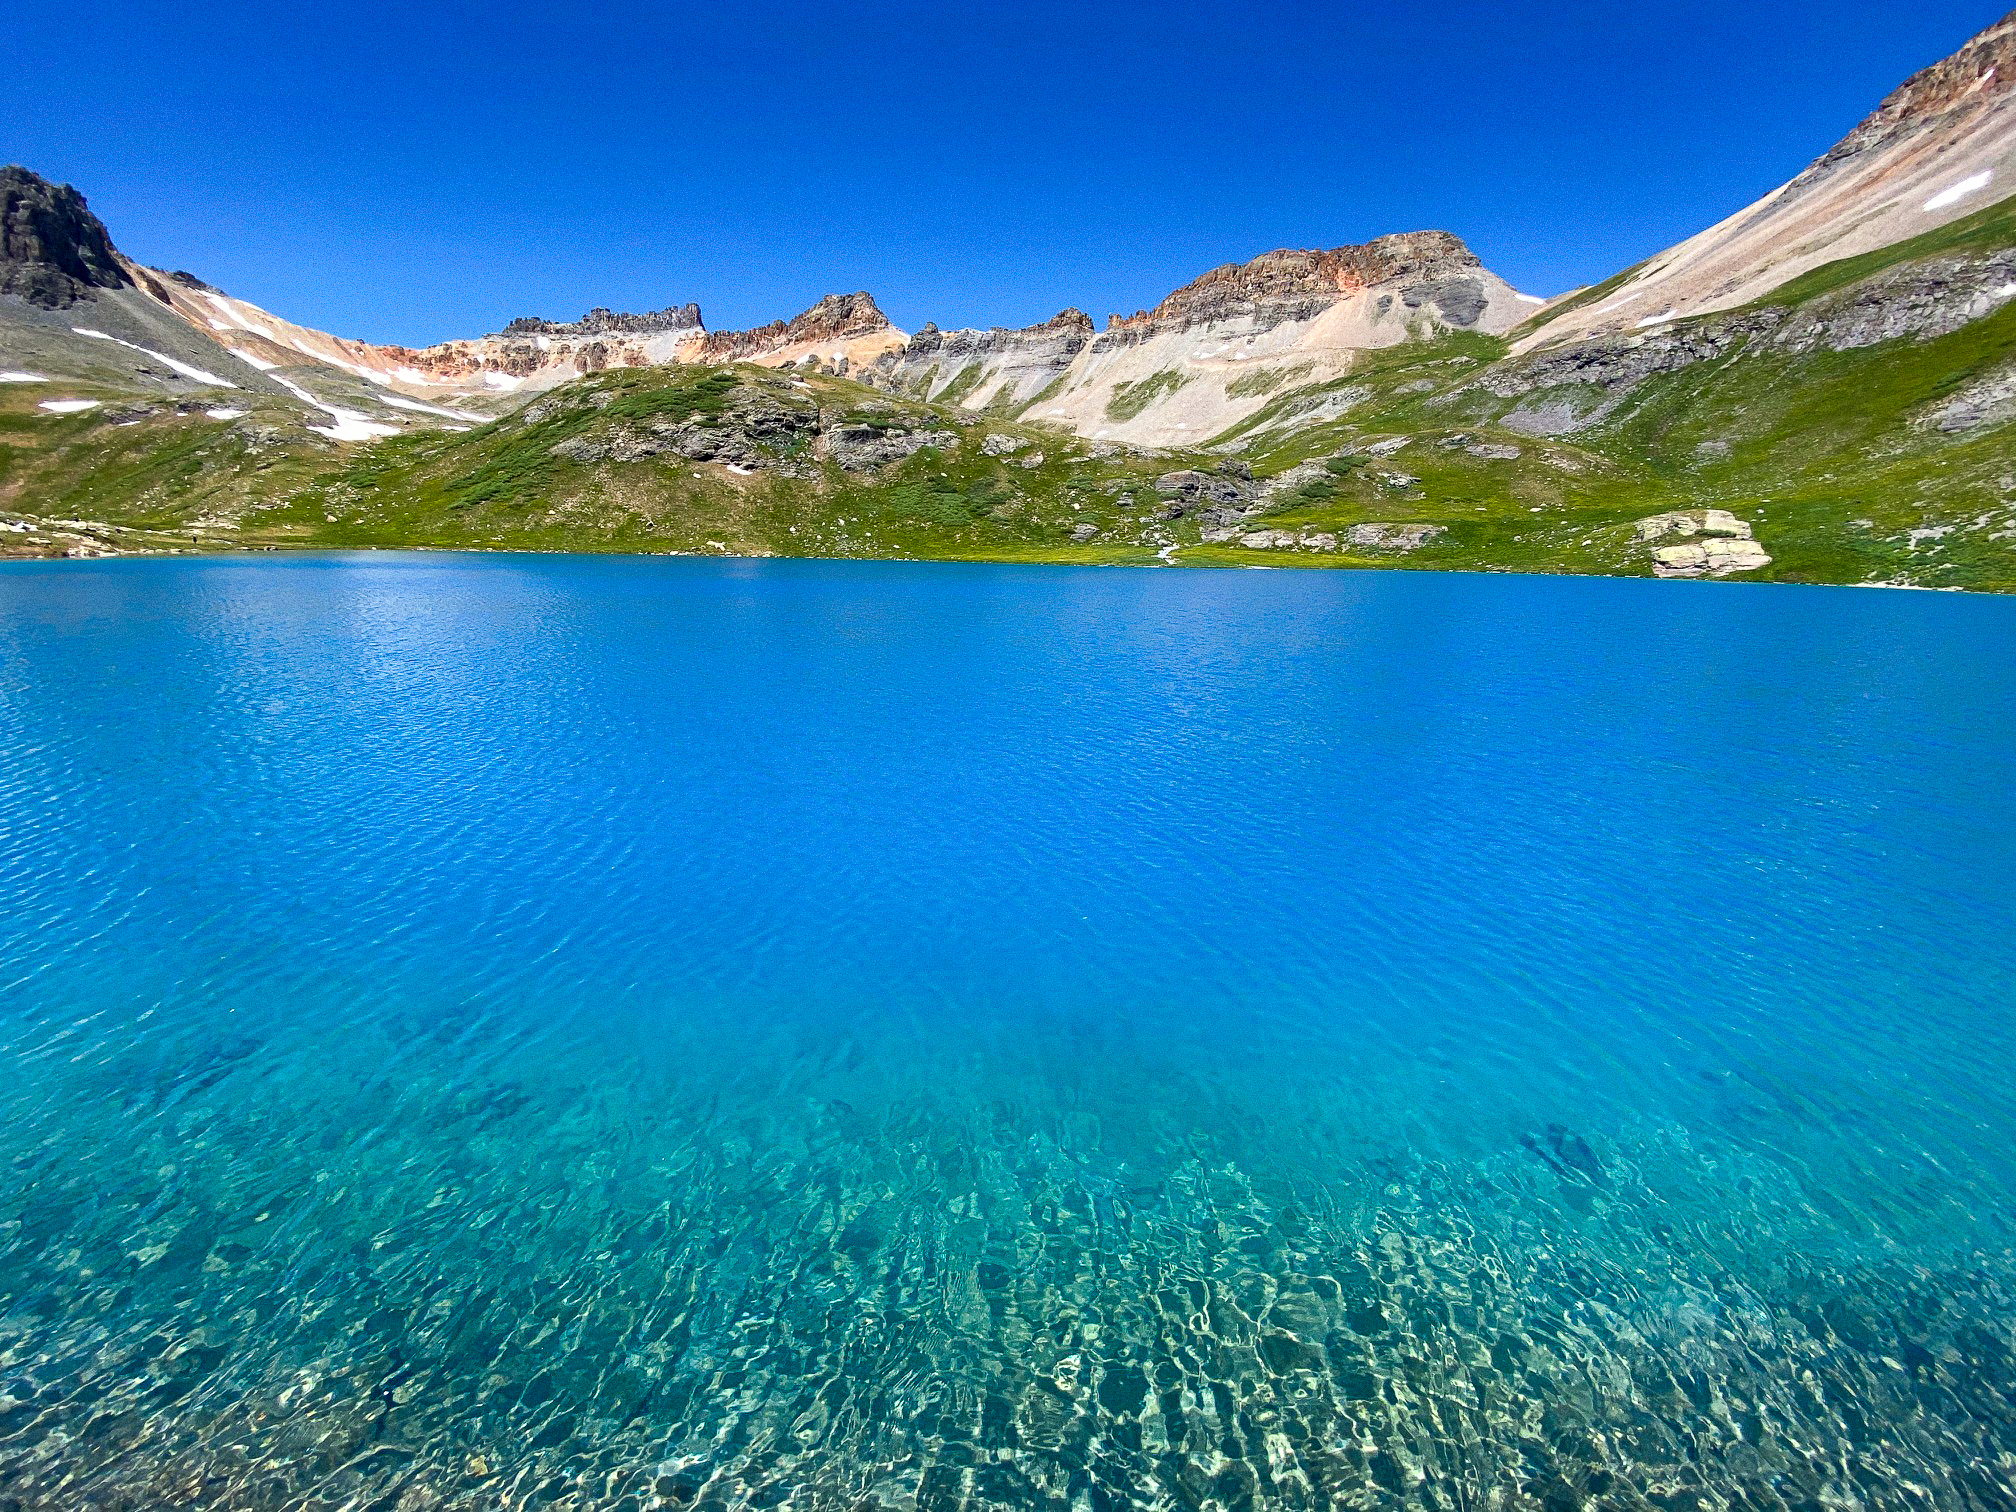 Why the Ice Lakes Basin trail should be your next big hike